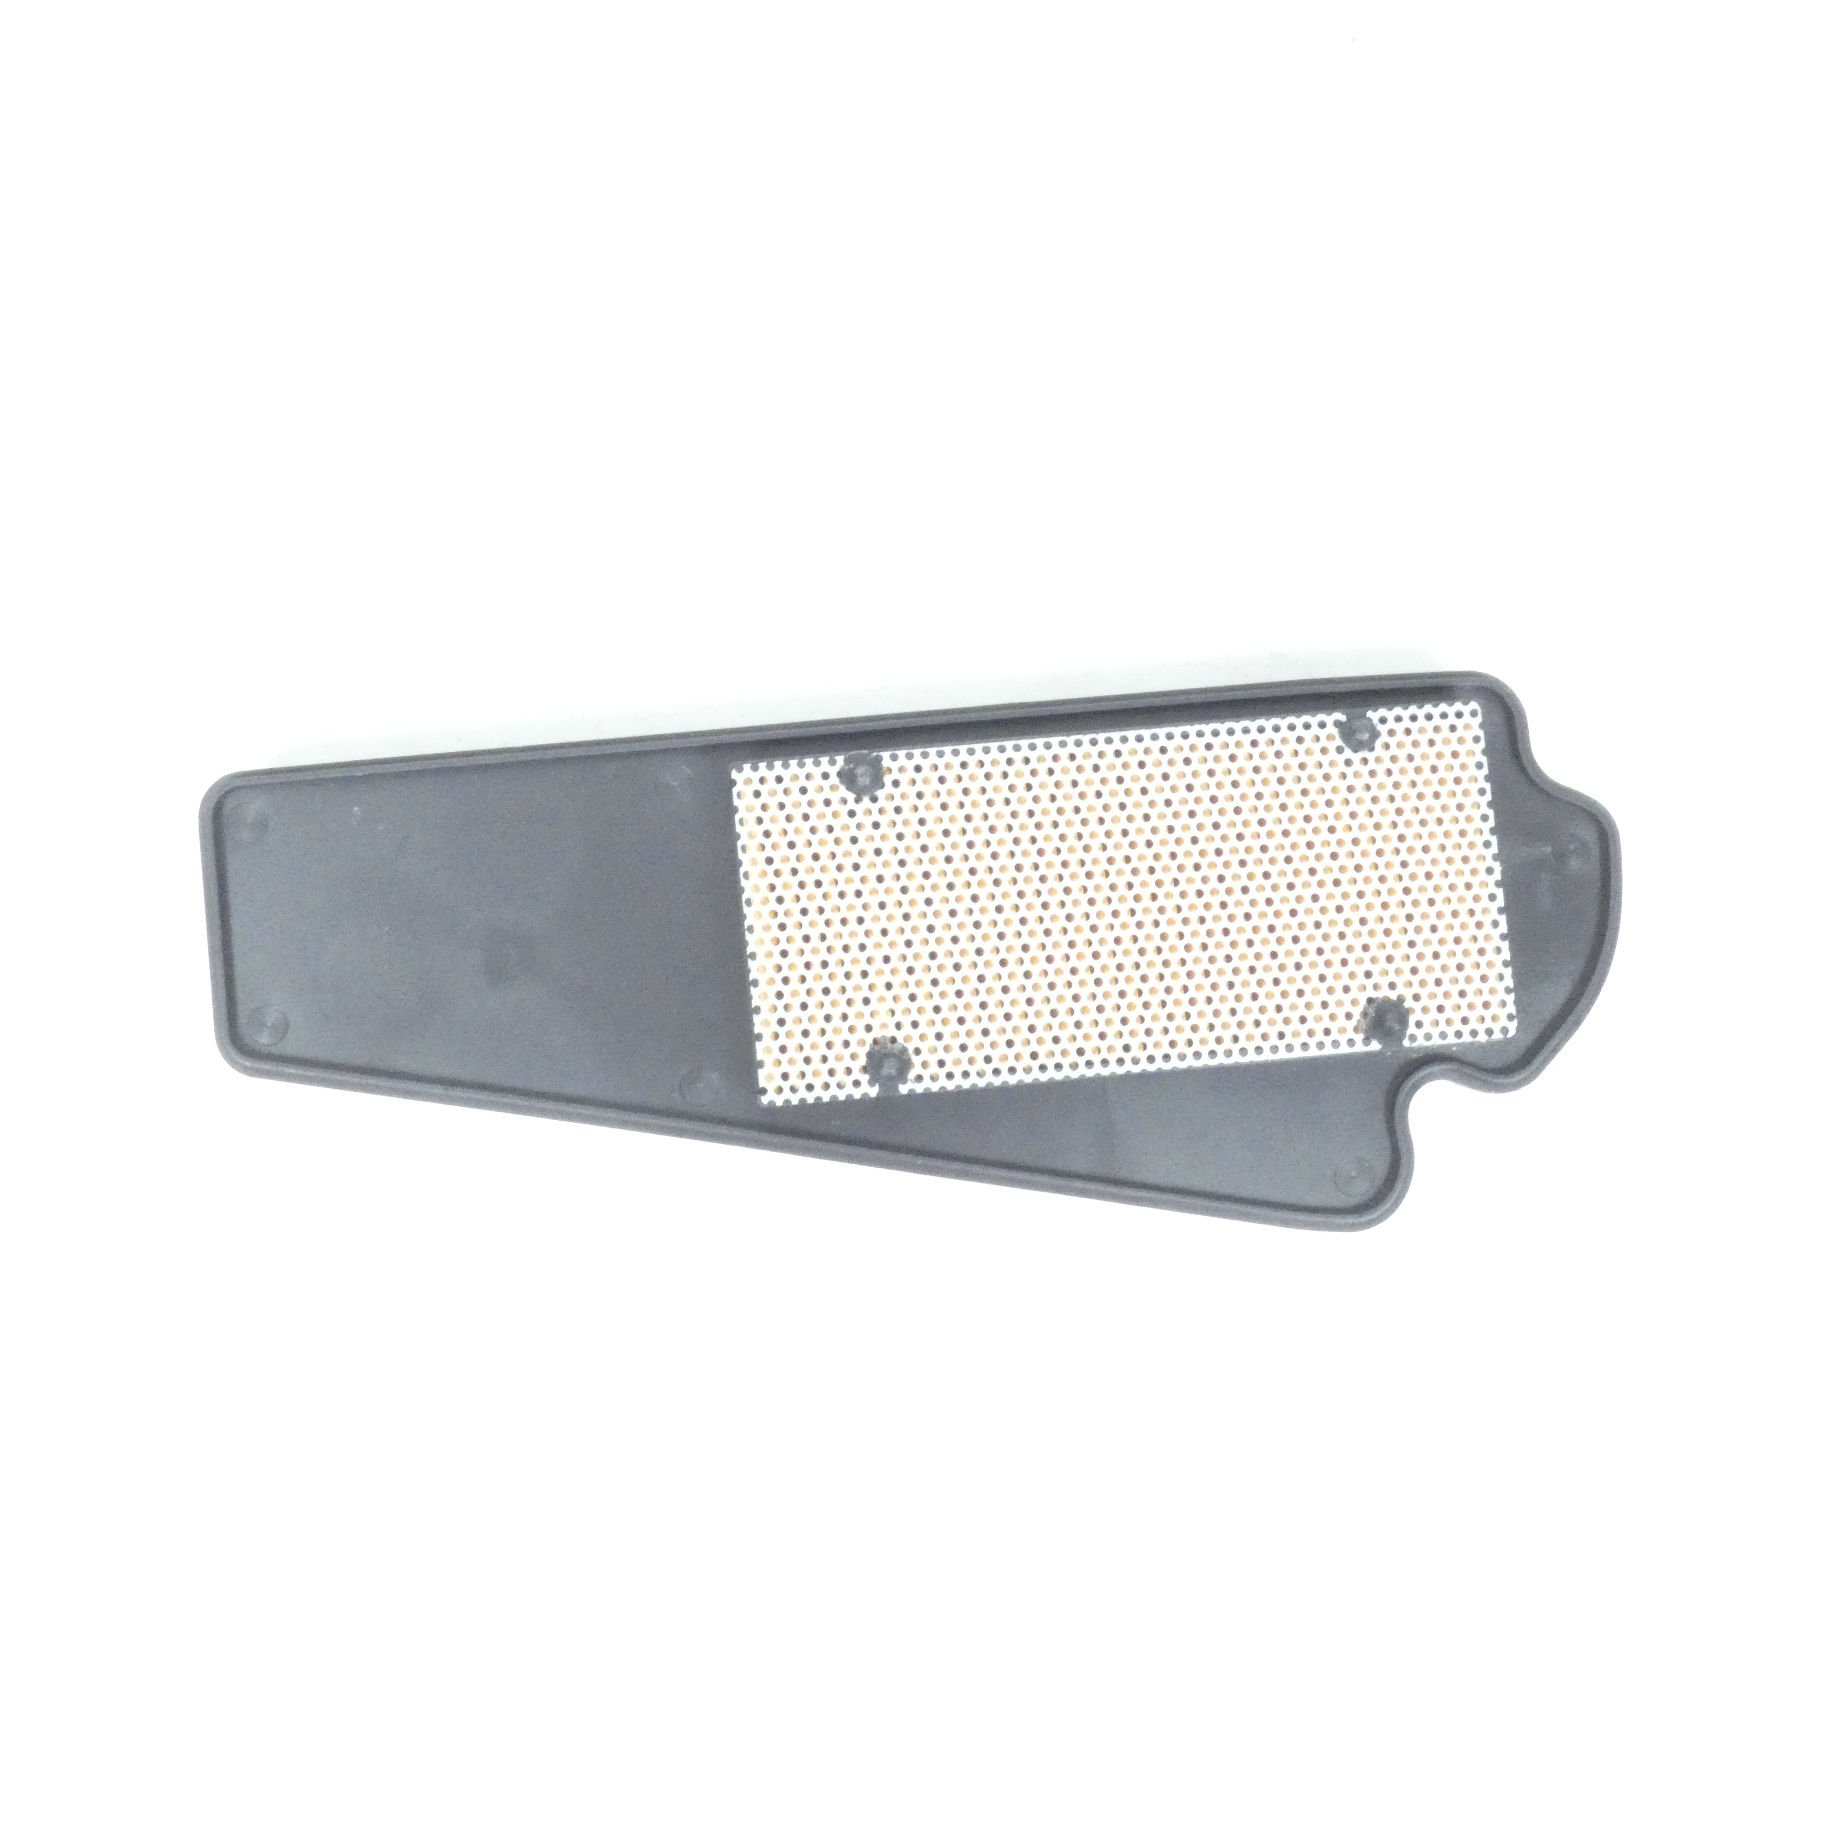 Filtre à air P2R pour scooter Sym 50 Crox 4T 17211-AAA-000 Neuf